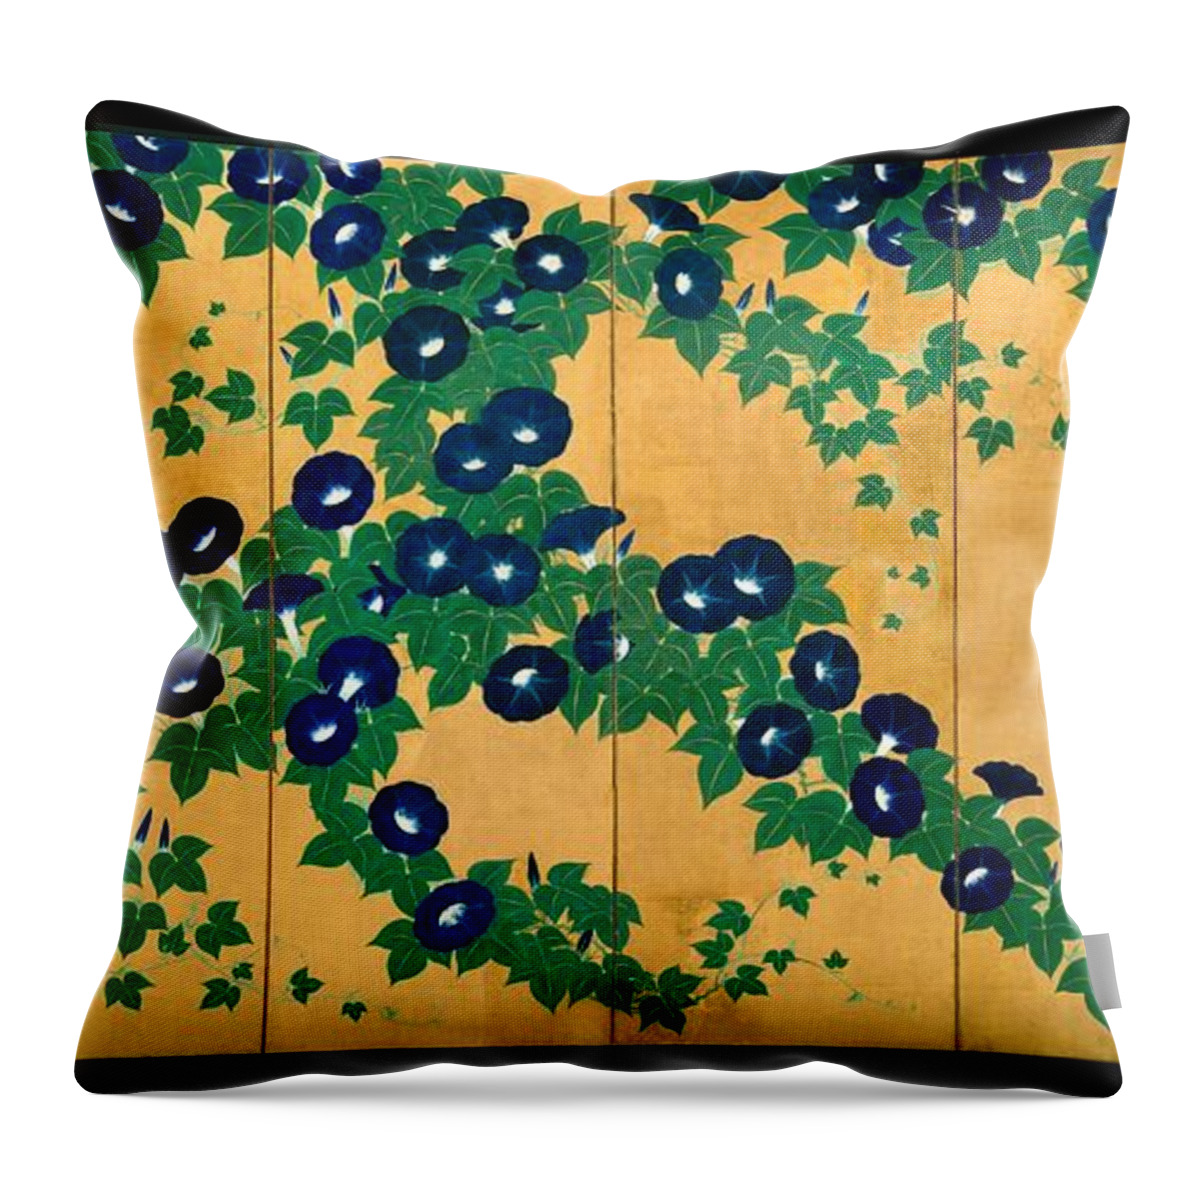 Morning Glories Throw Pillow featuring the painting Morning Glories by Eastern Accent 